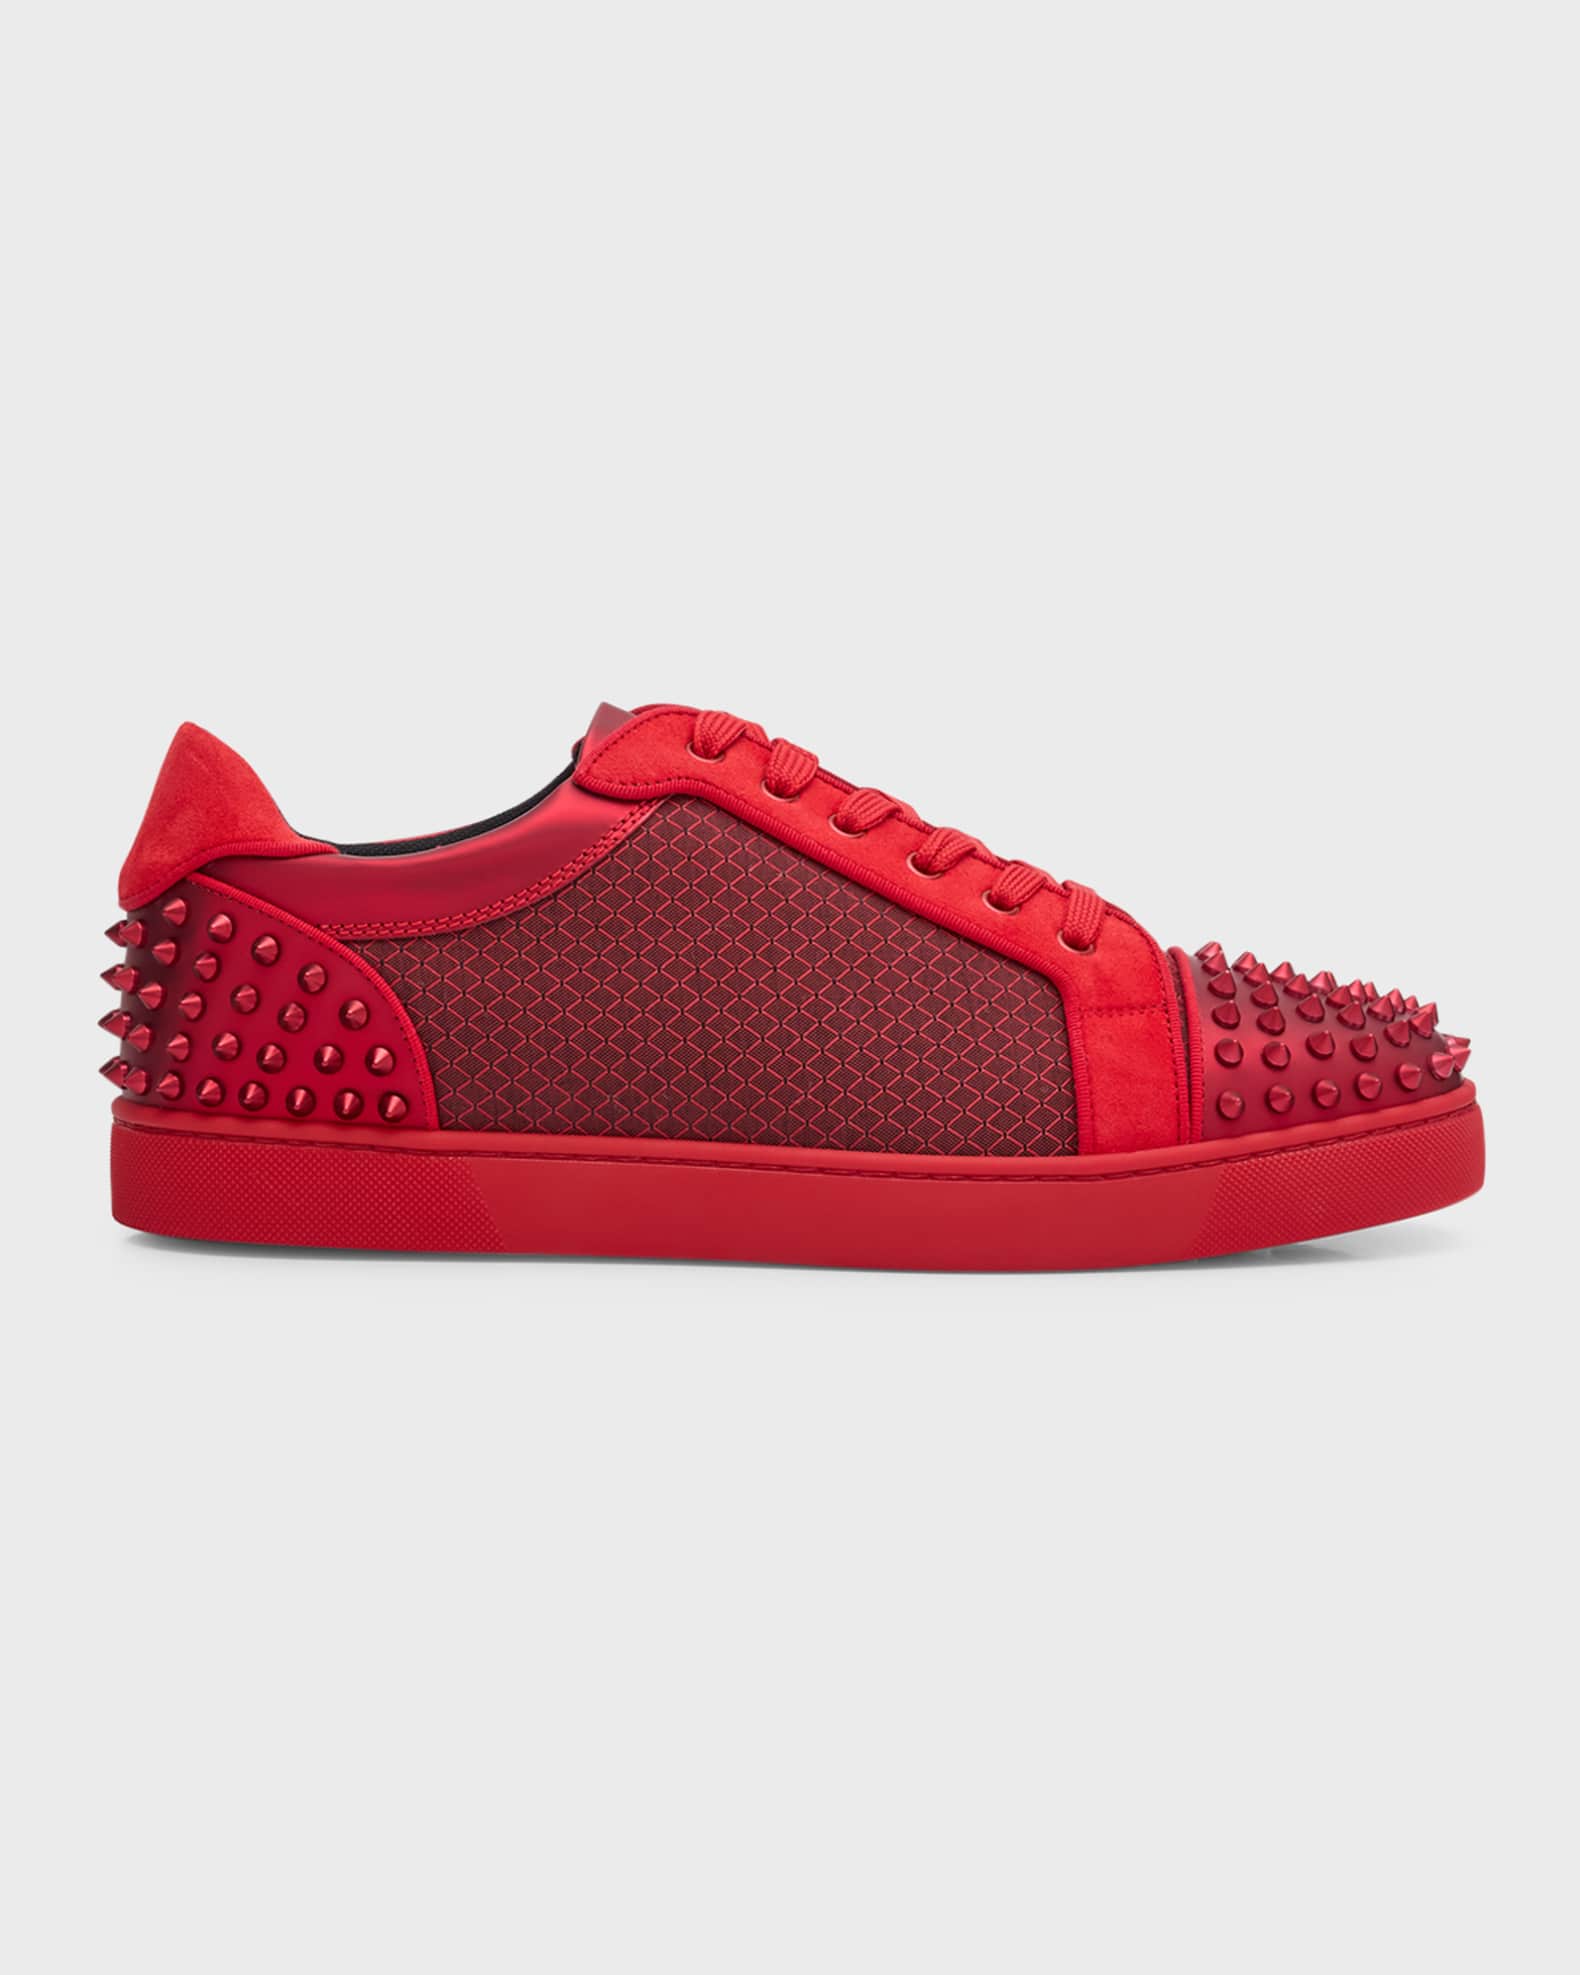 Christian Louboutin Men's Seavaste 2 Low-Top Leather Spike Sneakers ...